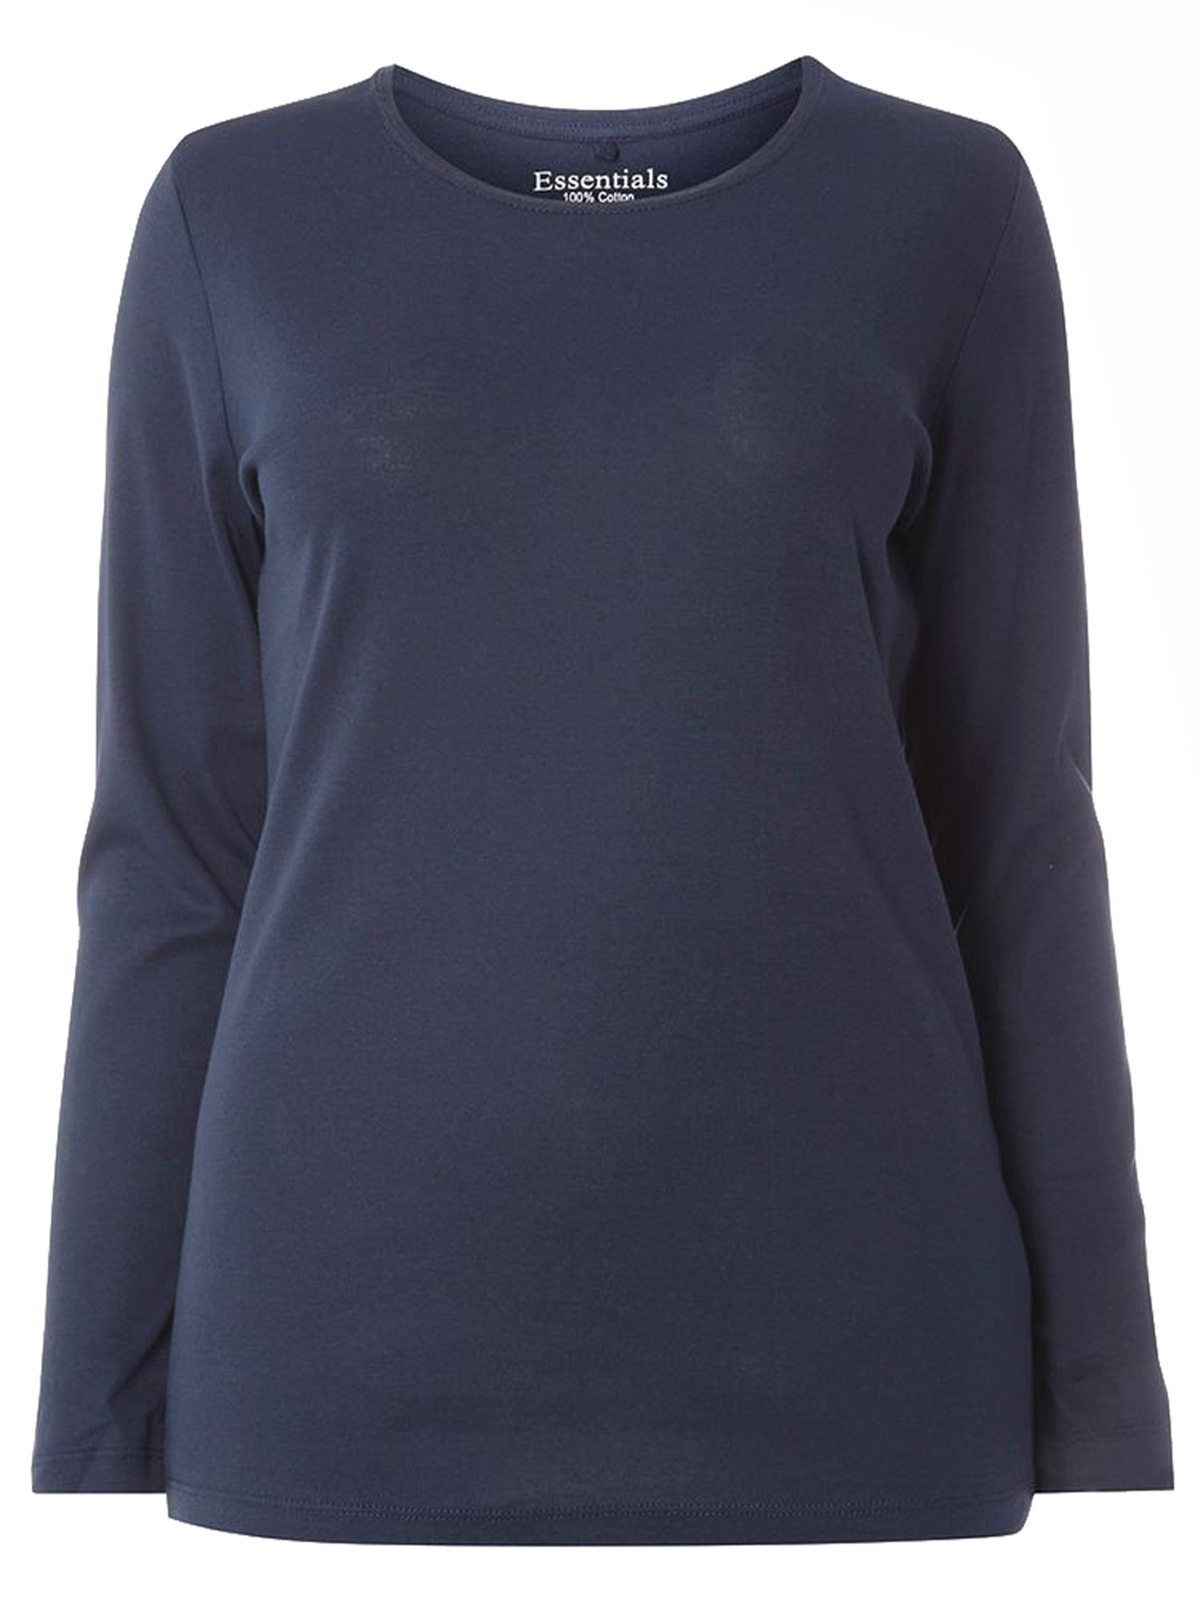 NAVY Pure Cotton Long Sleeve Top - Plus Size 16 to 30/32